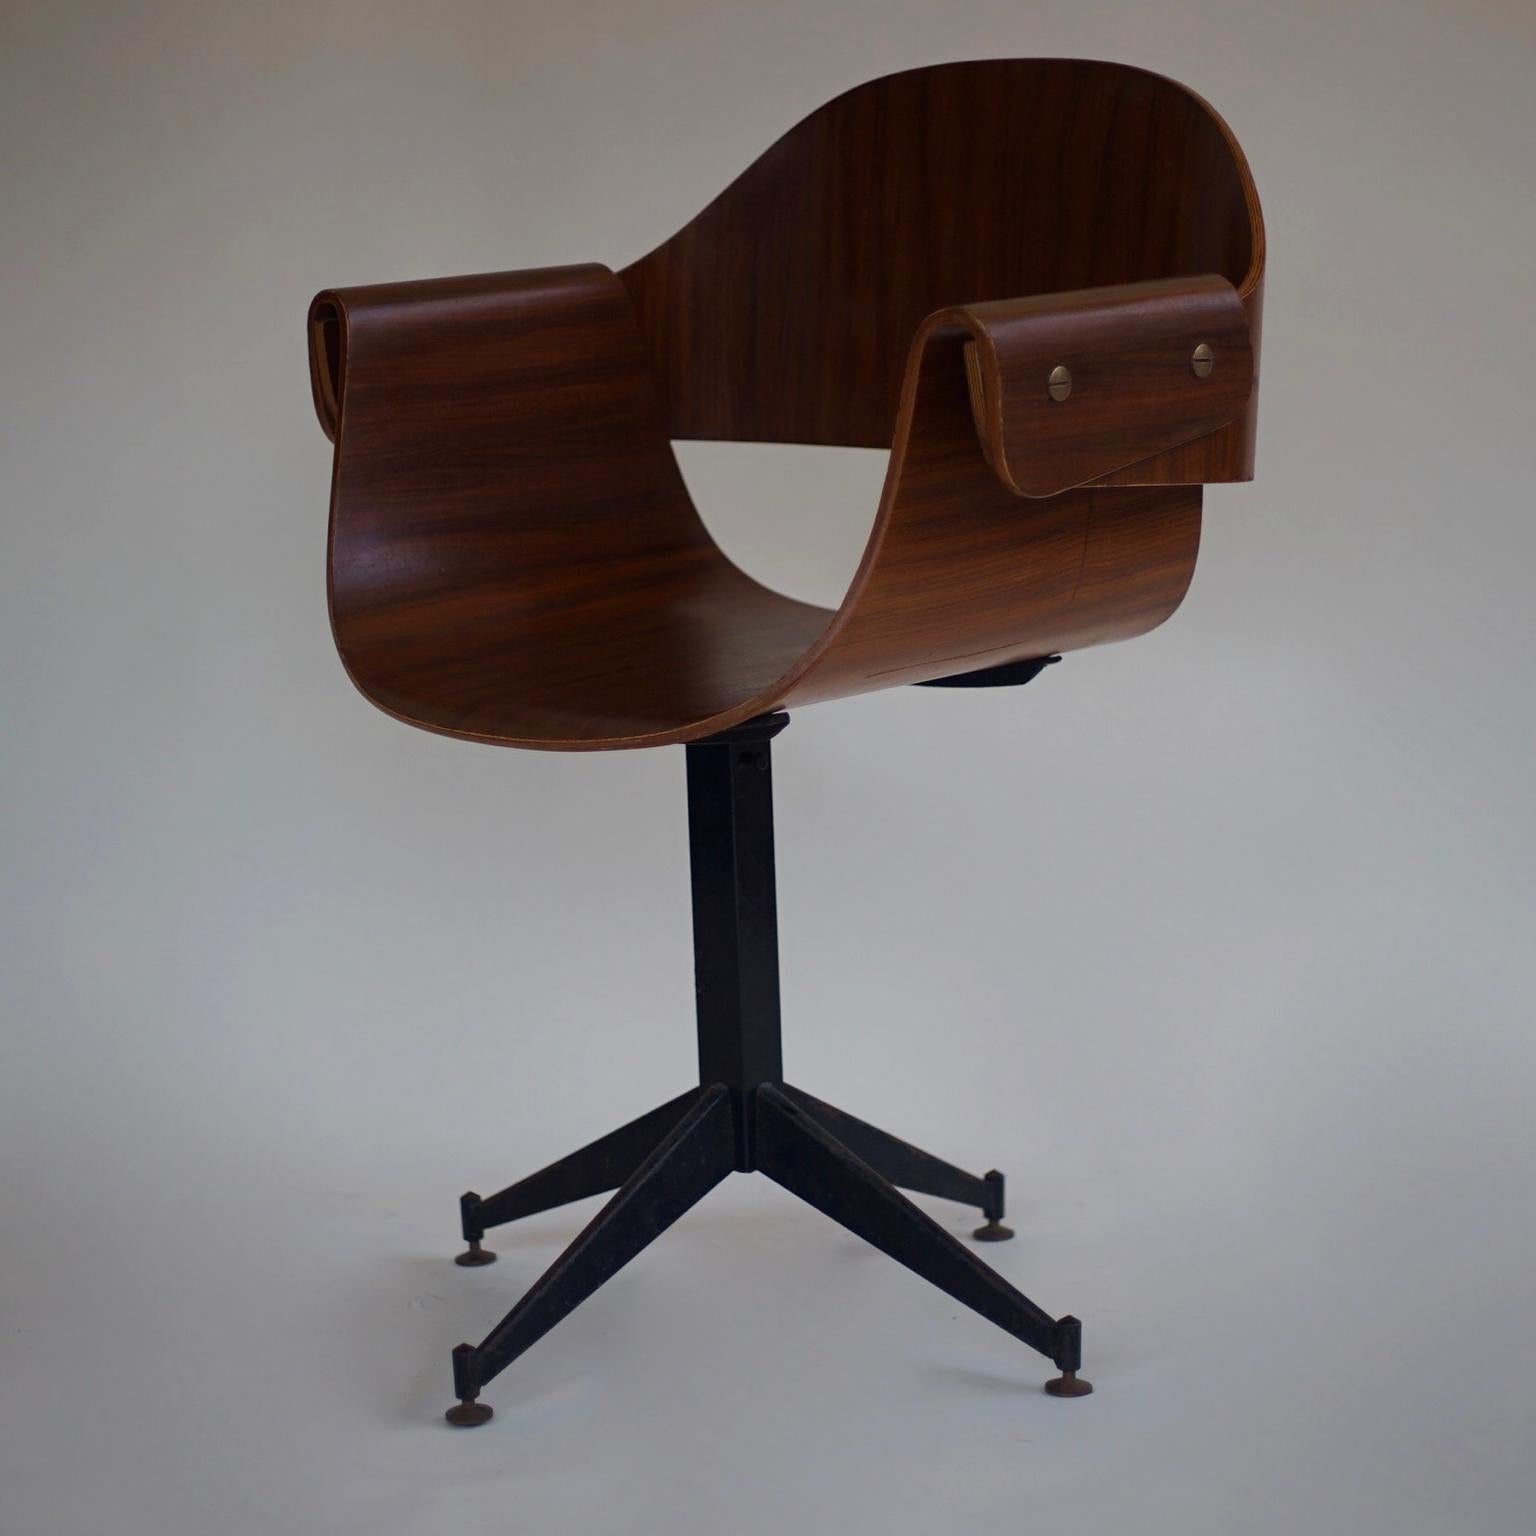 Italian 1950s Bent Ply Desk Chair by Carlo Ratti, Italy